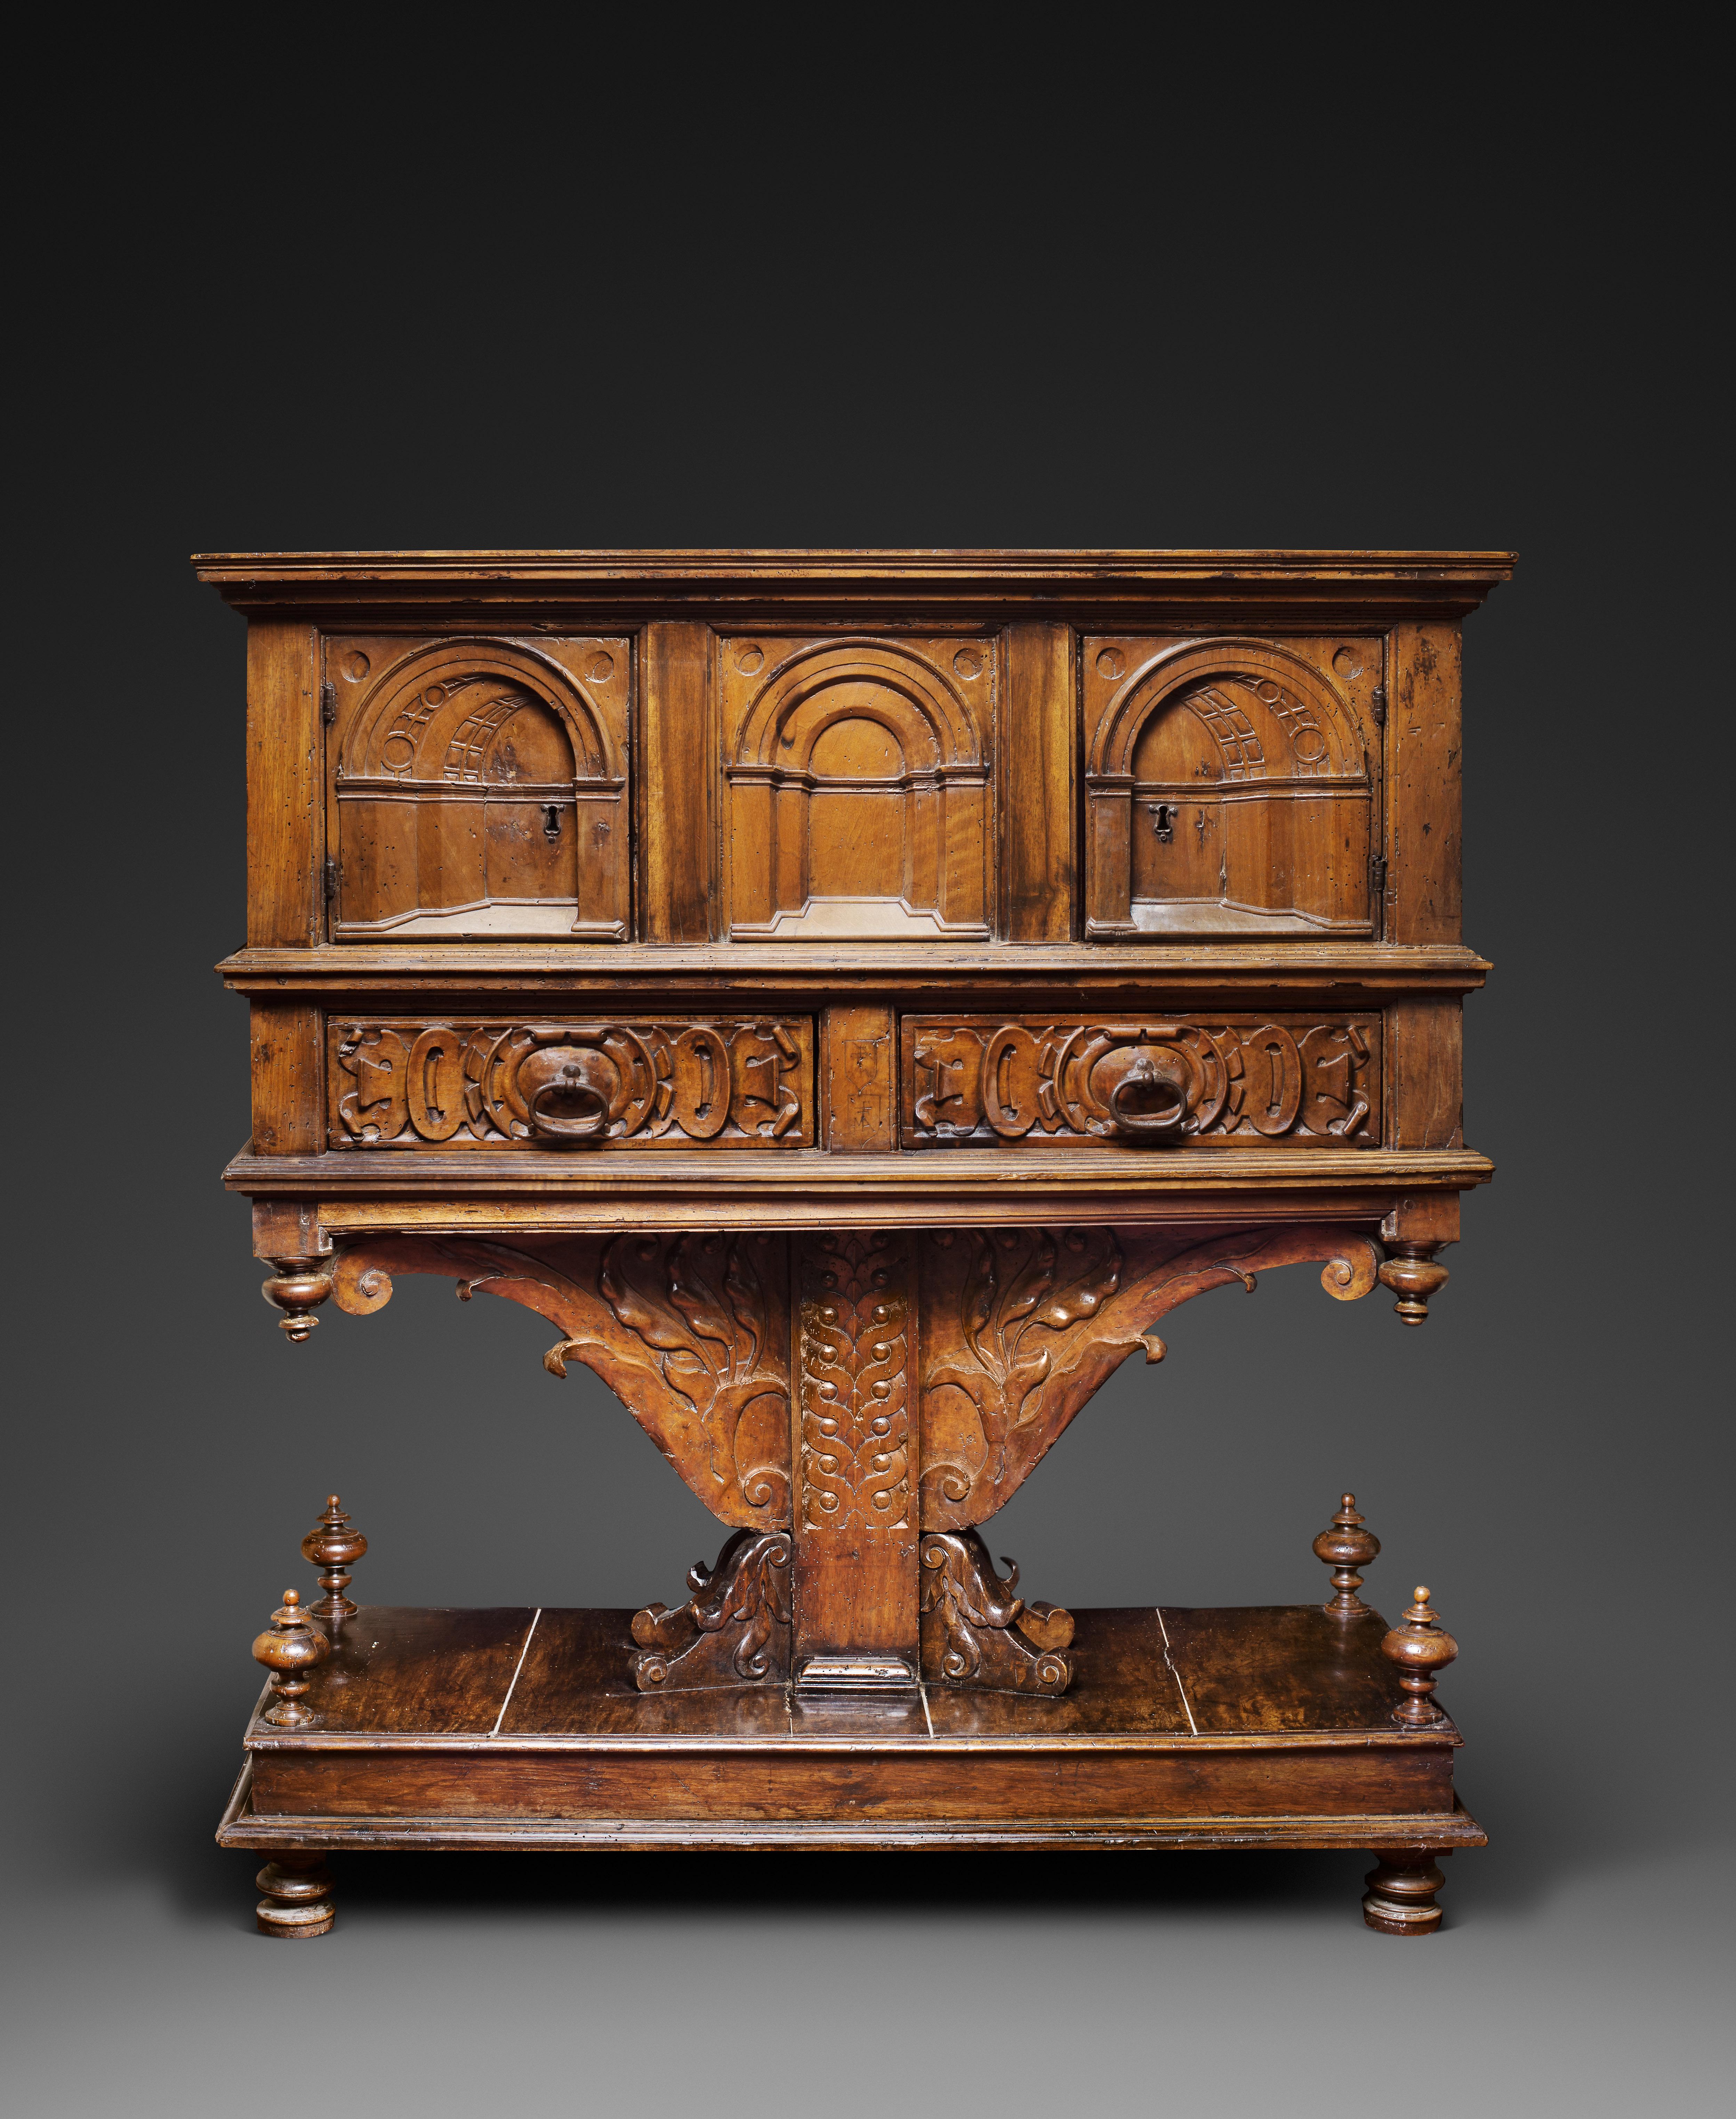 RARE ITALIAN RENAISSANCE PERSPECTIVES SIDEBOARD WITH FAN-SHAPED PEDESTAL

ORIGIN: TUSCANY, FLORENCE
PERIOD: 16th CENTURY

Height : 143.5 cm
Length : 133 cm
Depth : 54 cm

Light coloured Walnut

This beautiful and very rare dresser of the